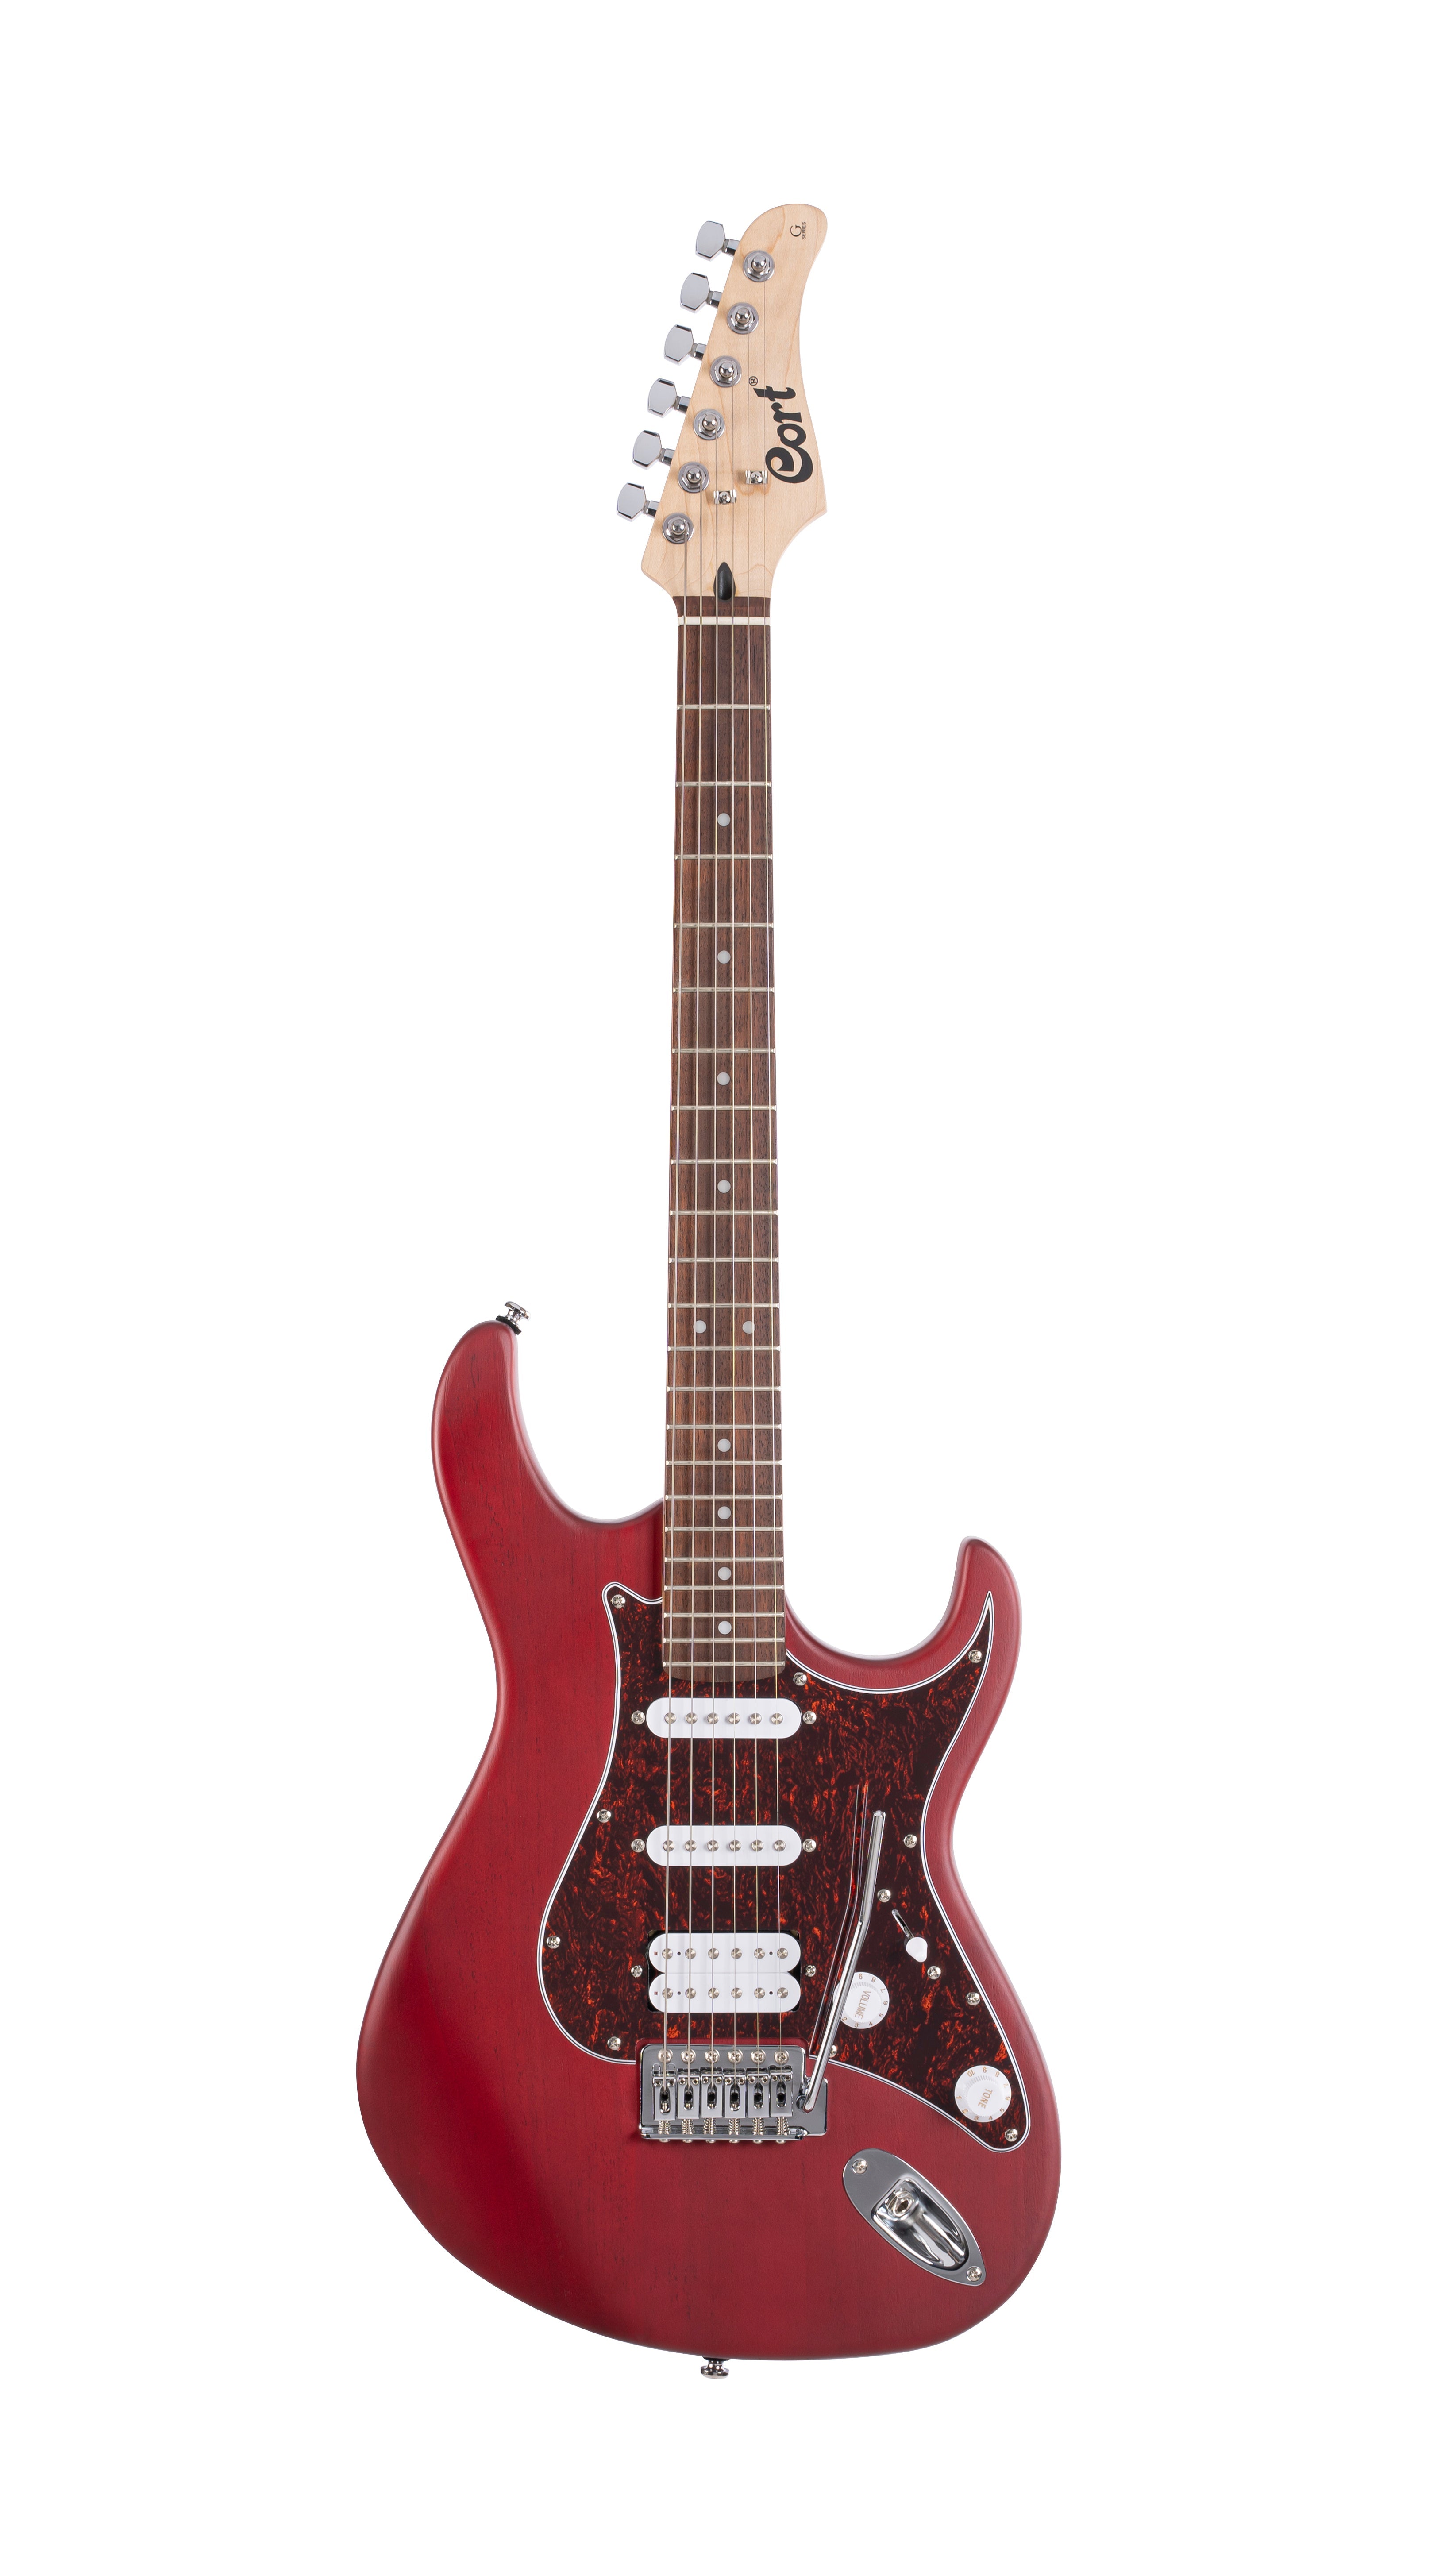 Cort G110 Open Pore Black Cherry, Electric Guitar for sale at Richards Guitars.